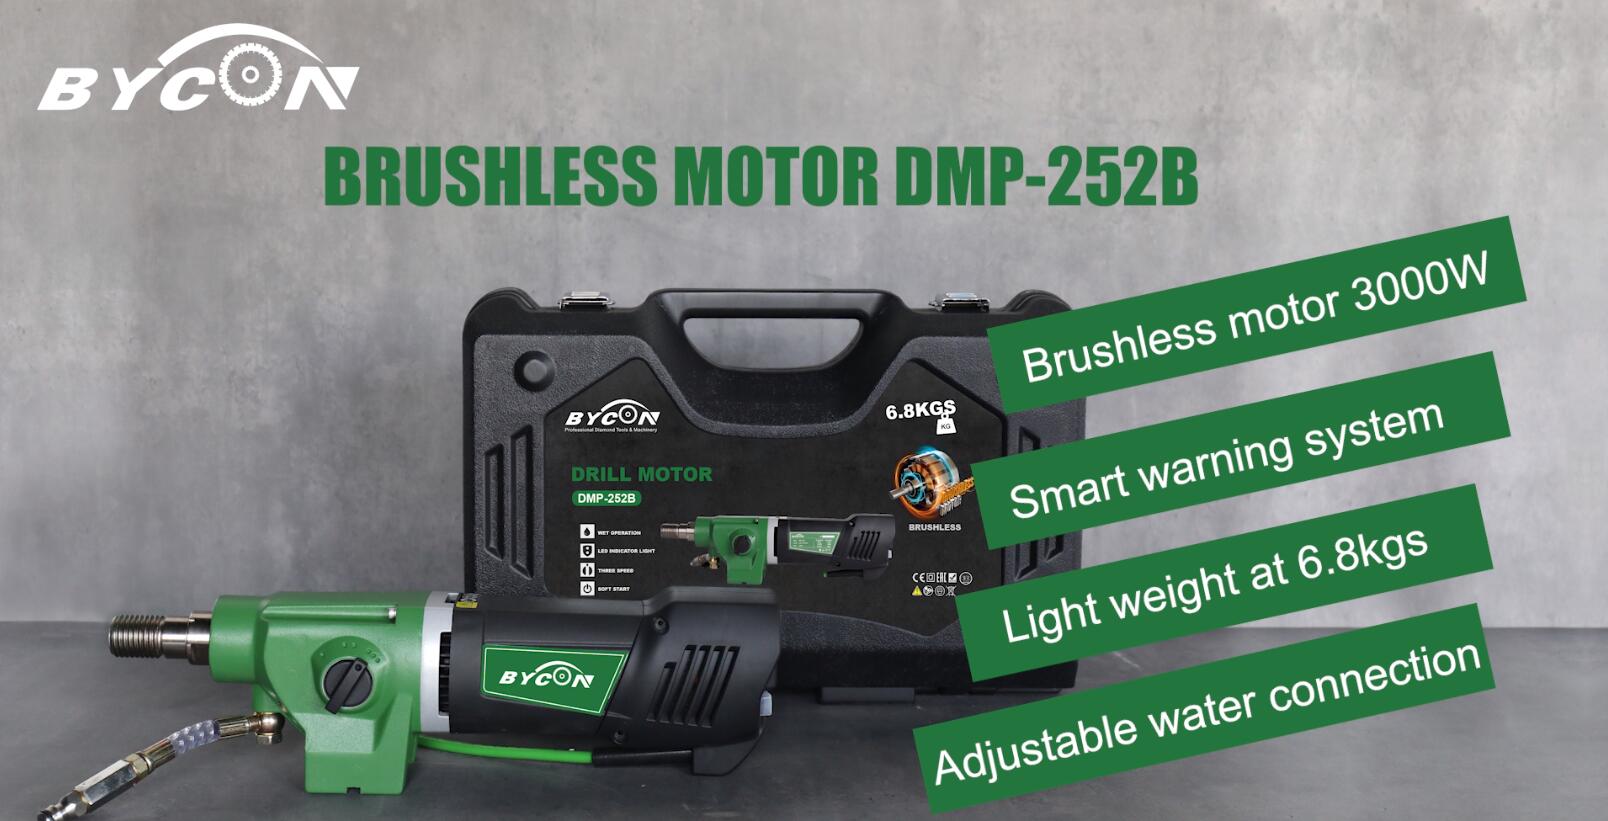 Brushless Motor DMP-252B Launched